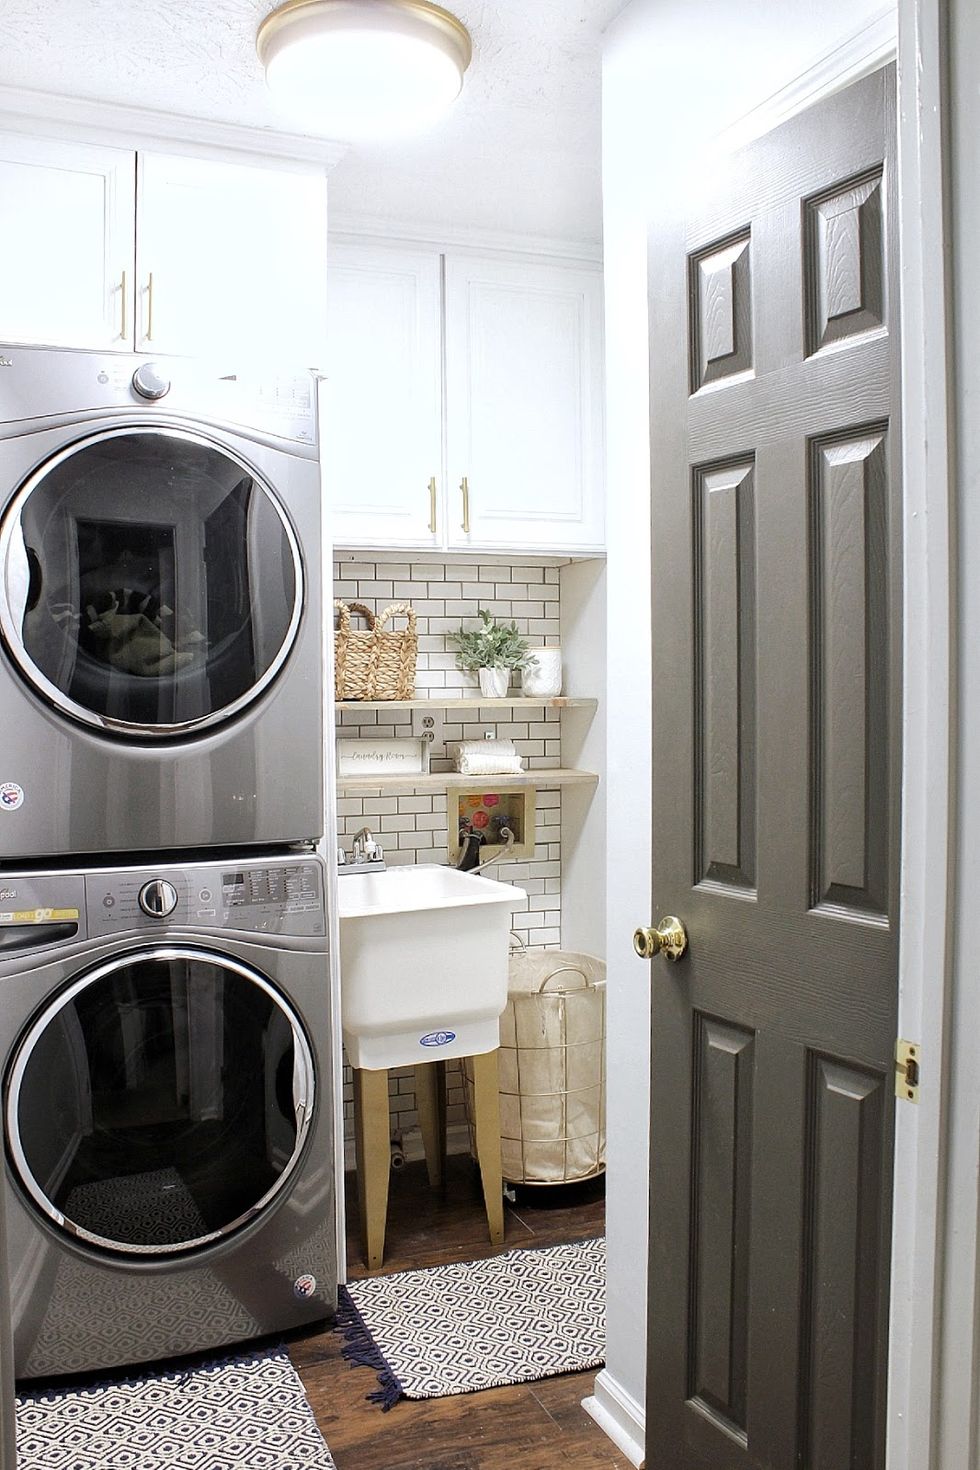 13 Beautiful Laundry Rooms - Decorating Ideas for Laundry Rooms